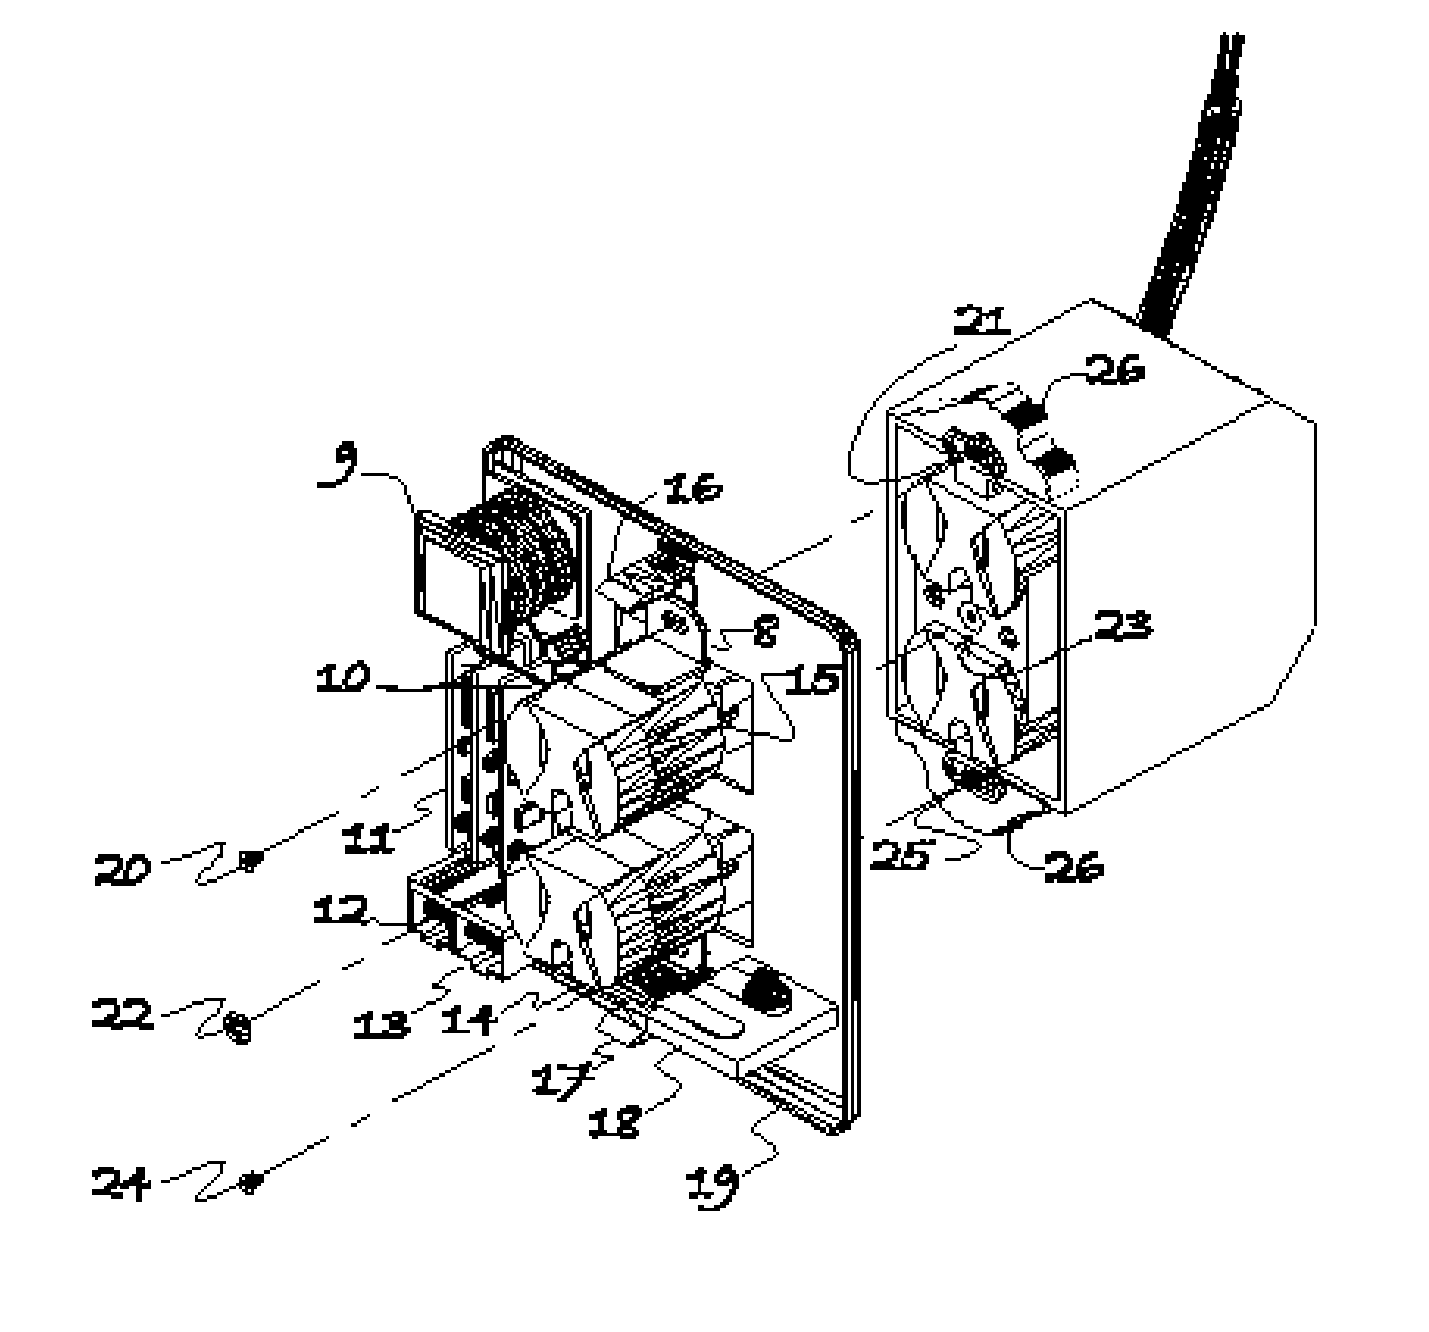 Apparatus that enables low cost installation of a secure and tamper proof assembly that accommodates lifeline support for power line communication devices